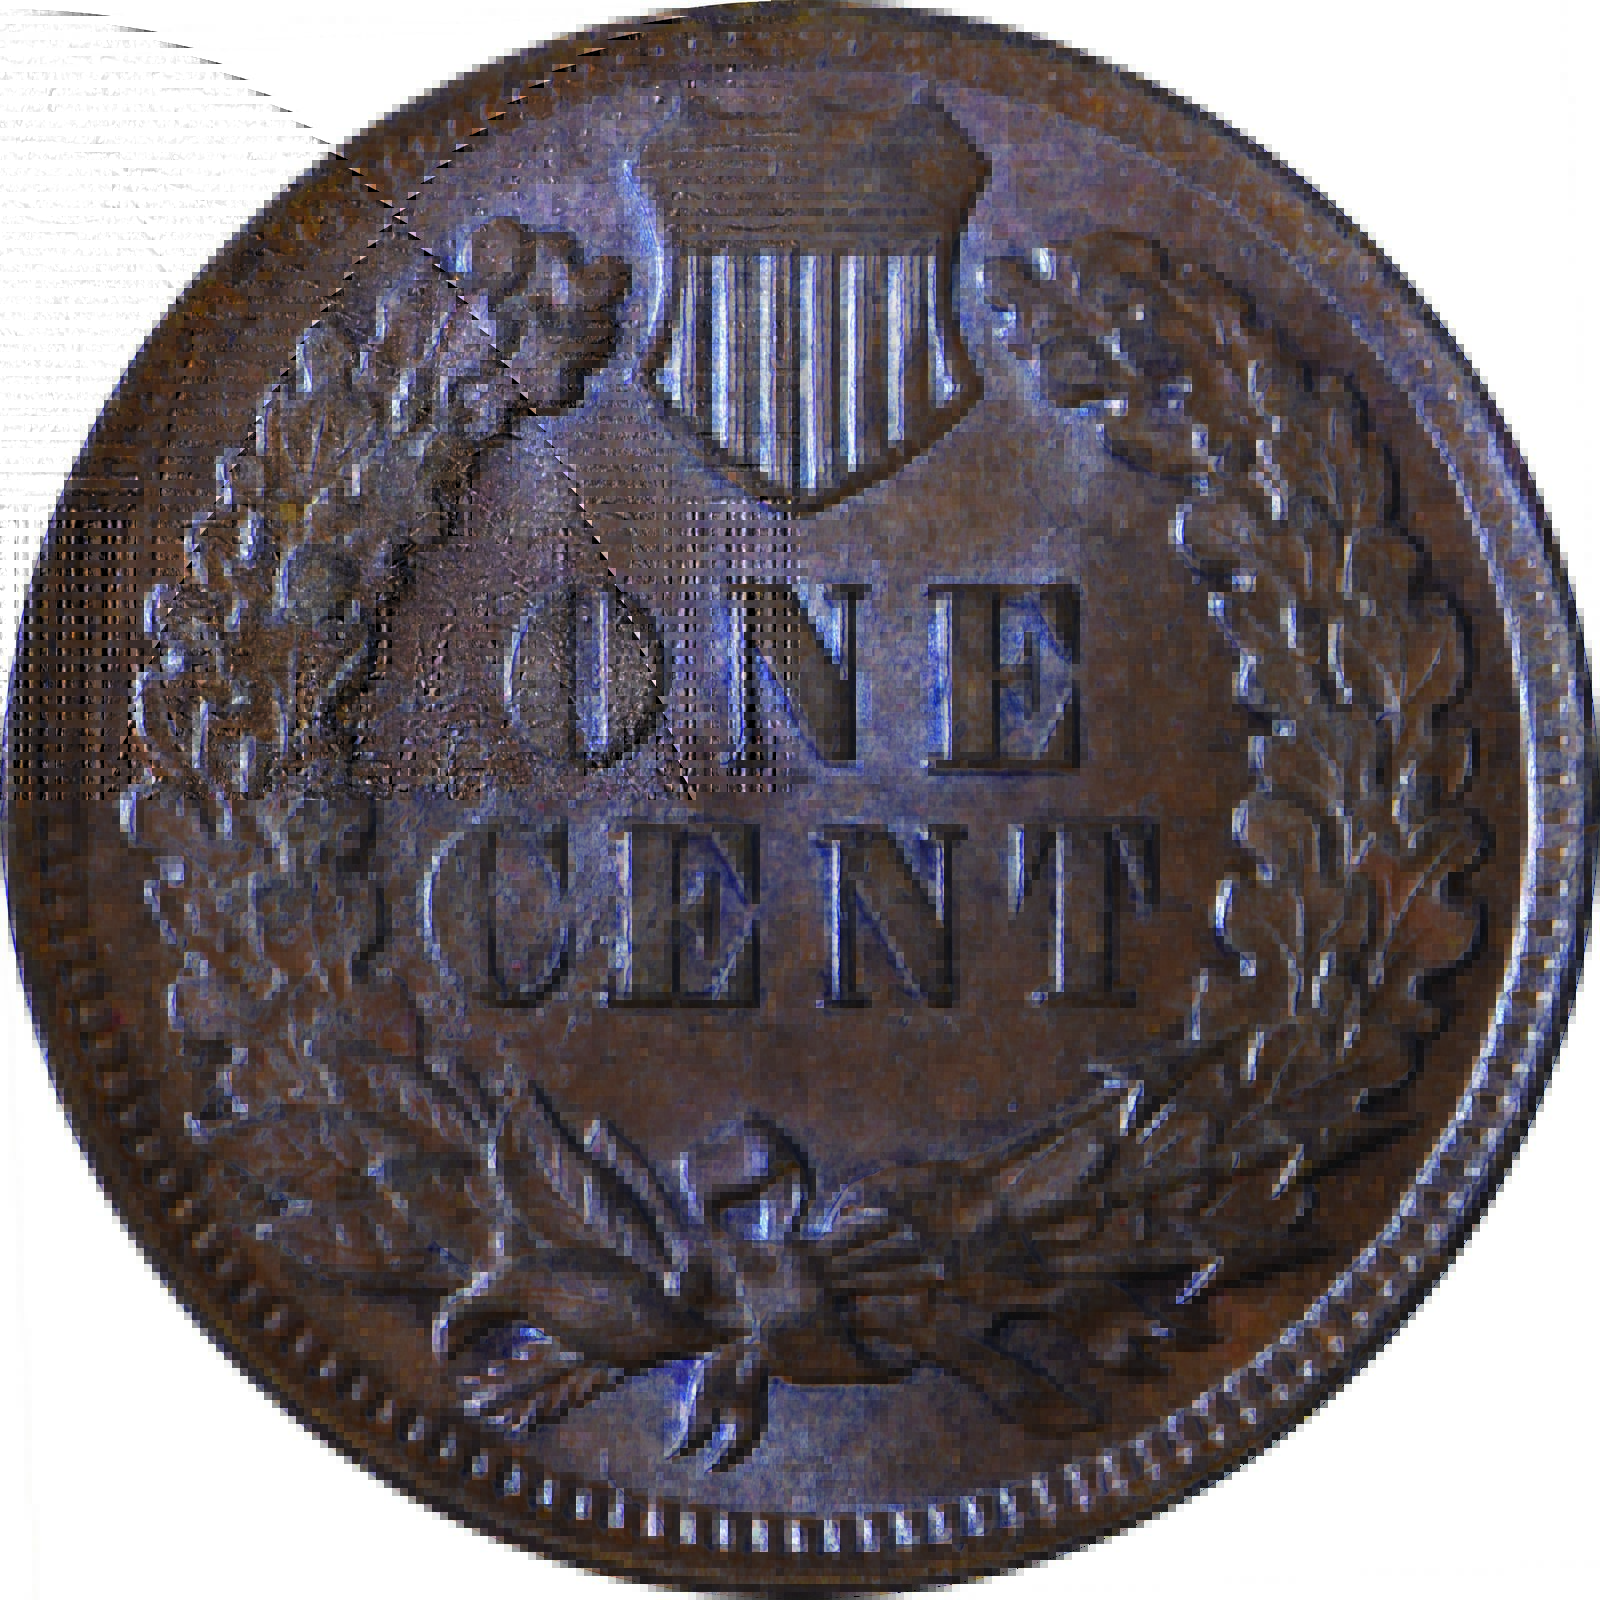 1901 RST-001 - Indian Head Penny - Photo by ANA Summer Seminar 2016